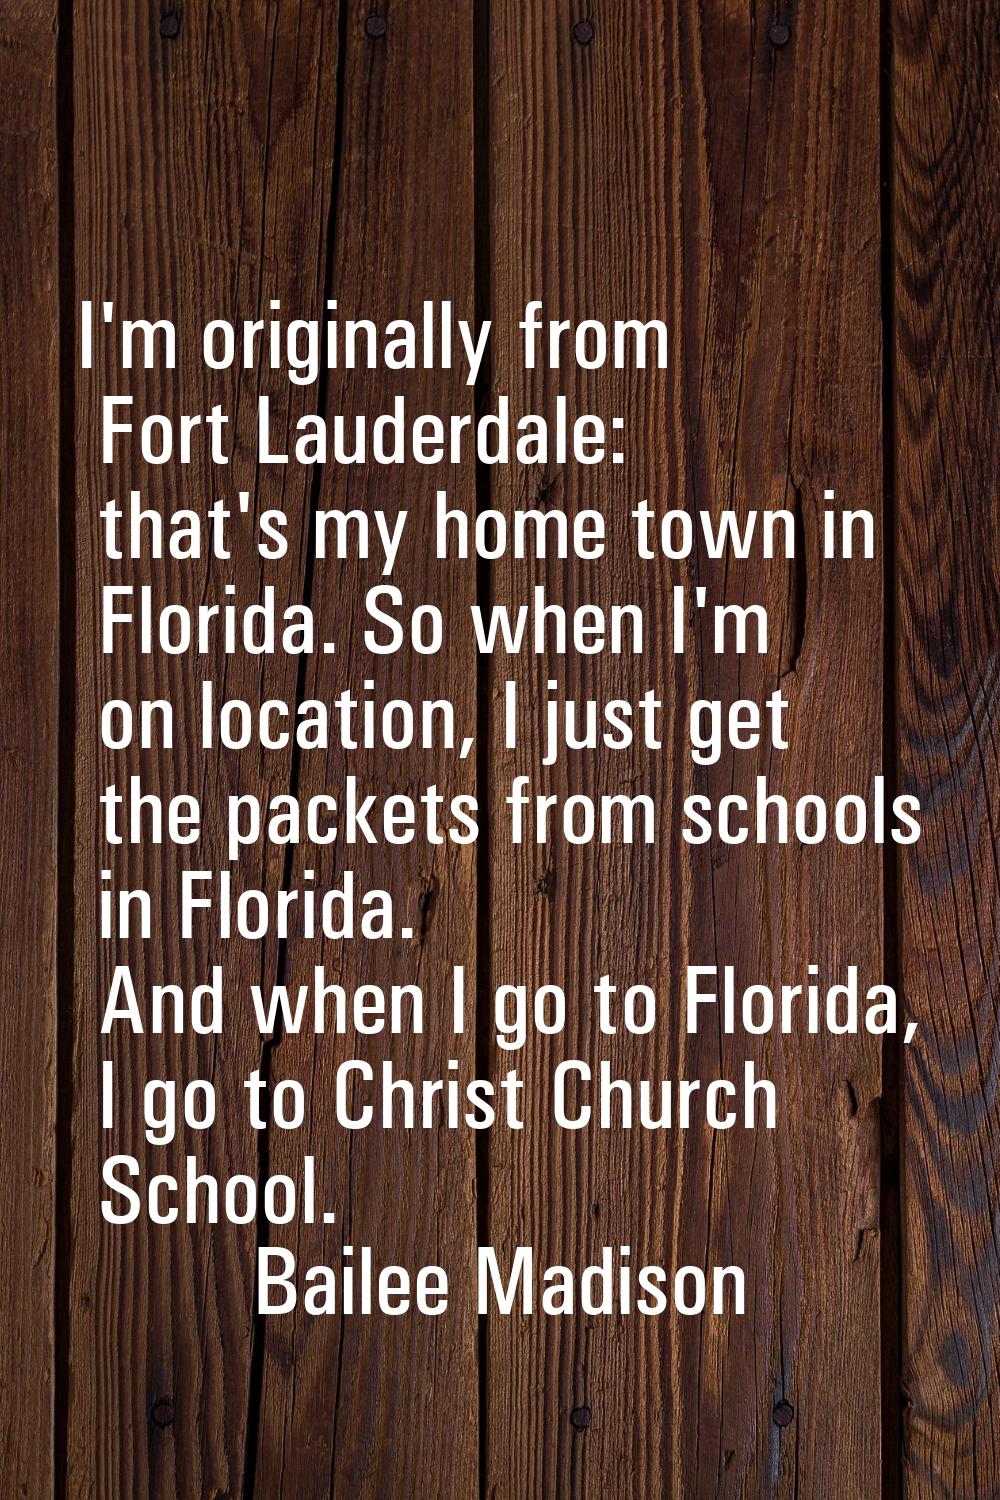 I'm originally from Fort Lauderdale: that's my home town in Florida. So when I'm on location, I jus